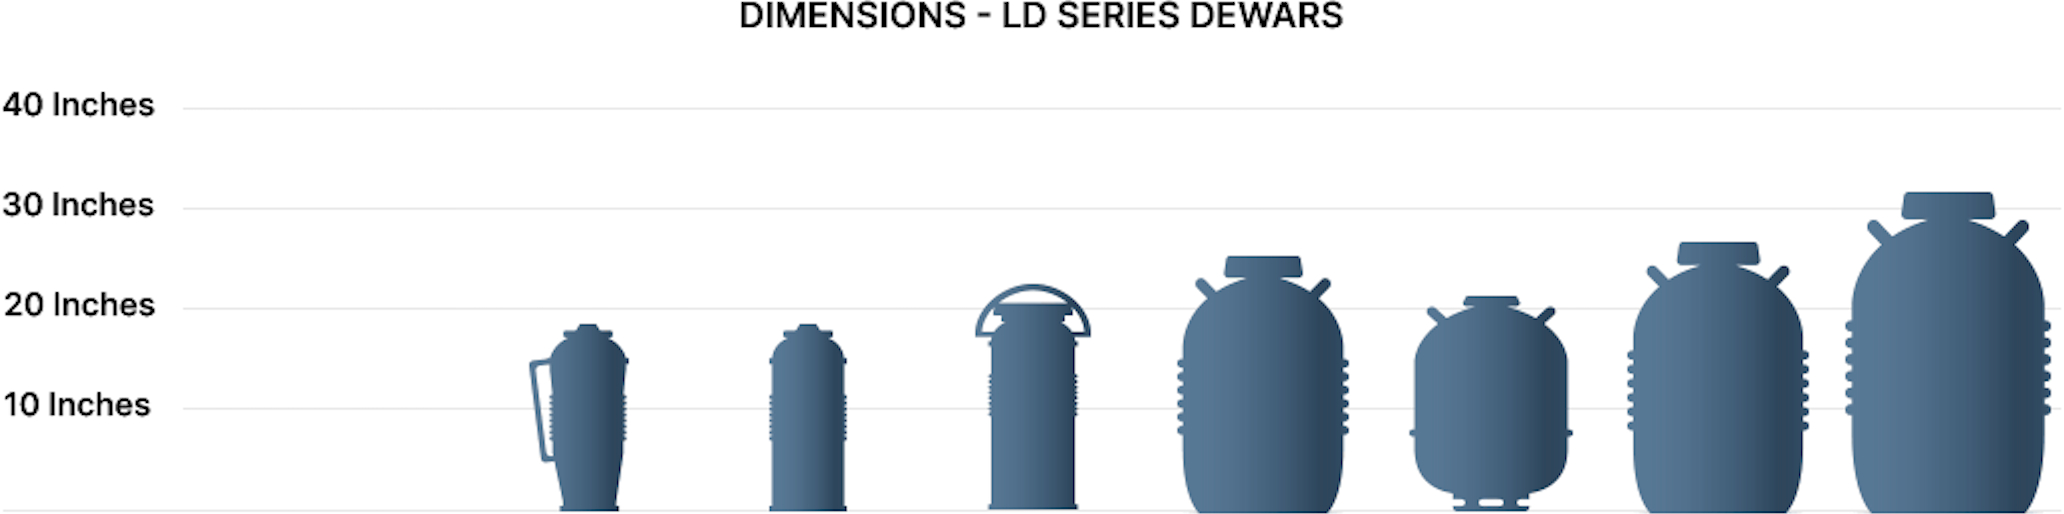 Gas Cylinders & Tank Sizes